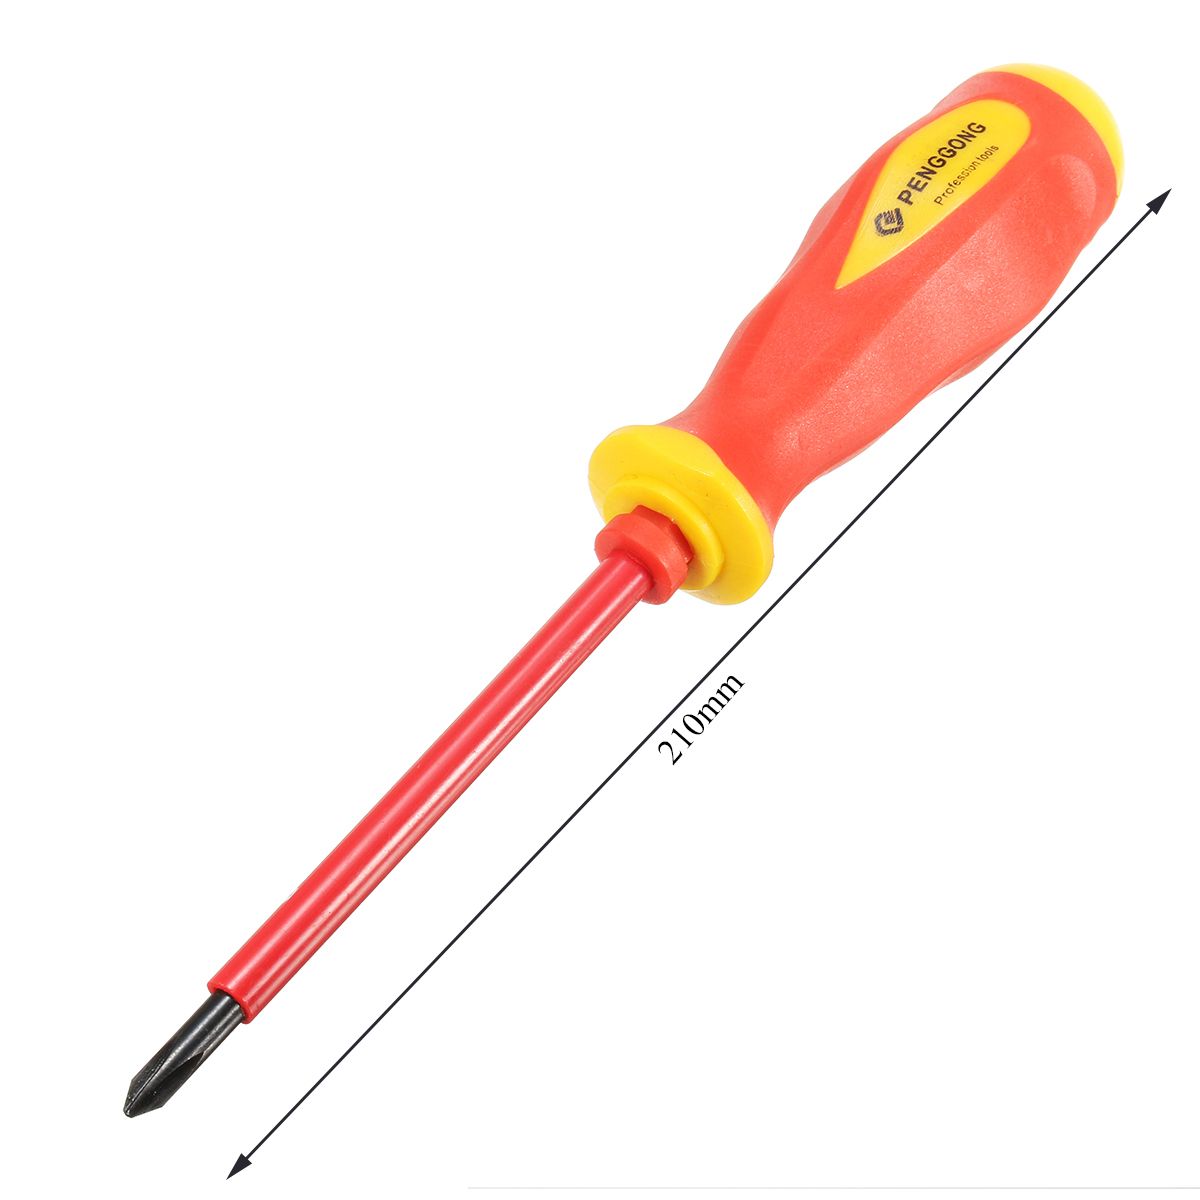 6-In-1-Insulated-Electrical-Screwdriver-Set-1000V-High-Voltage-Resistant-Repair-Tools-Kit-1249150